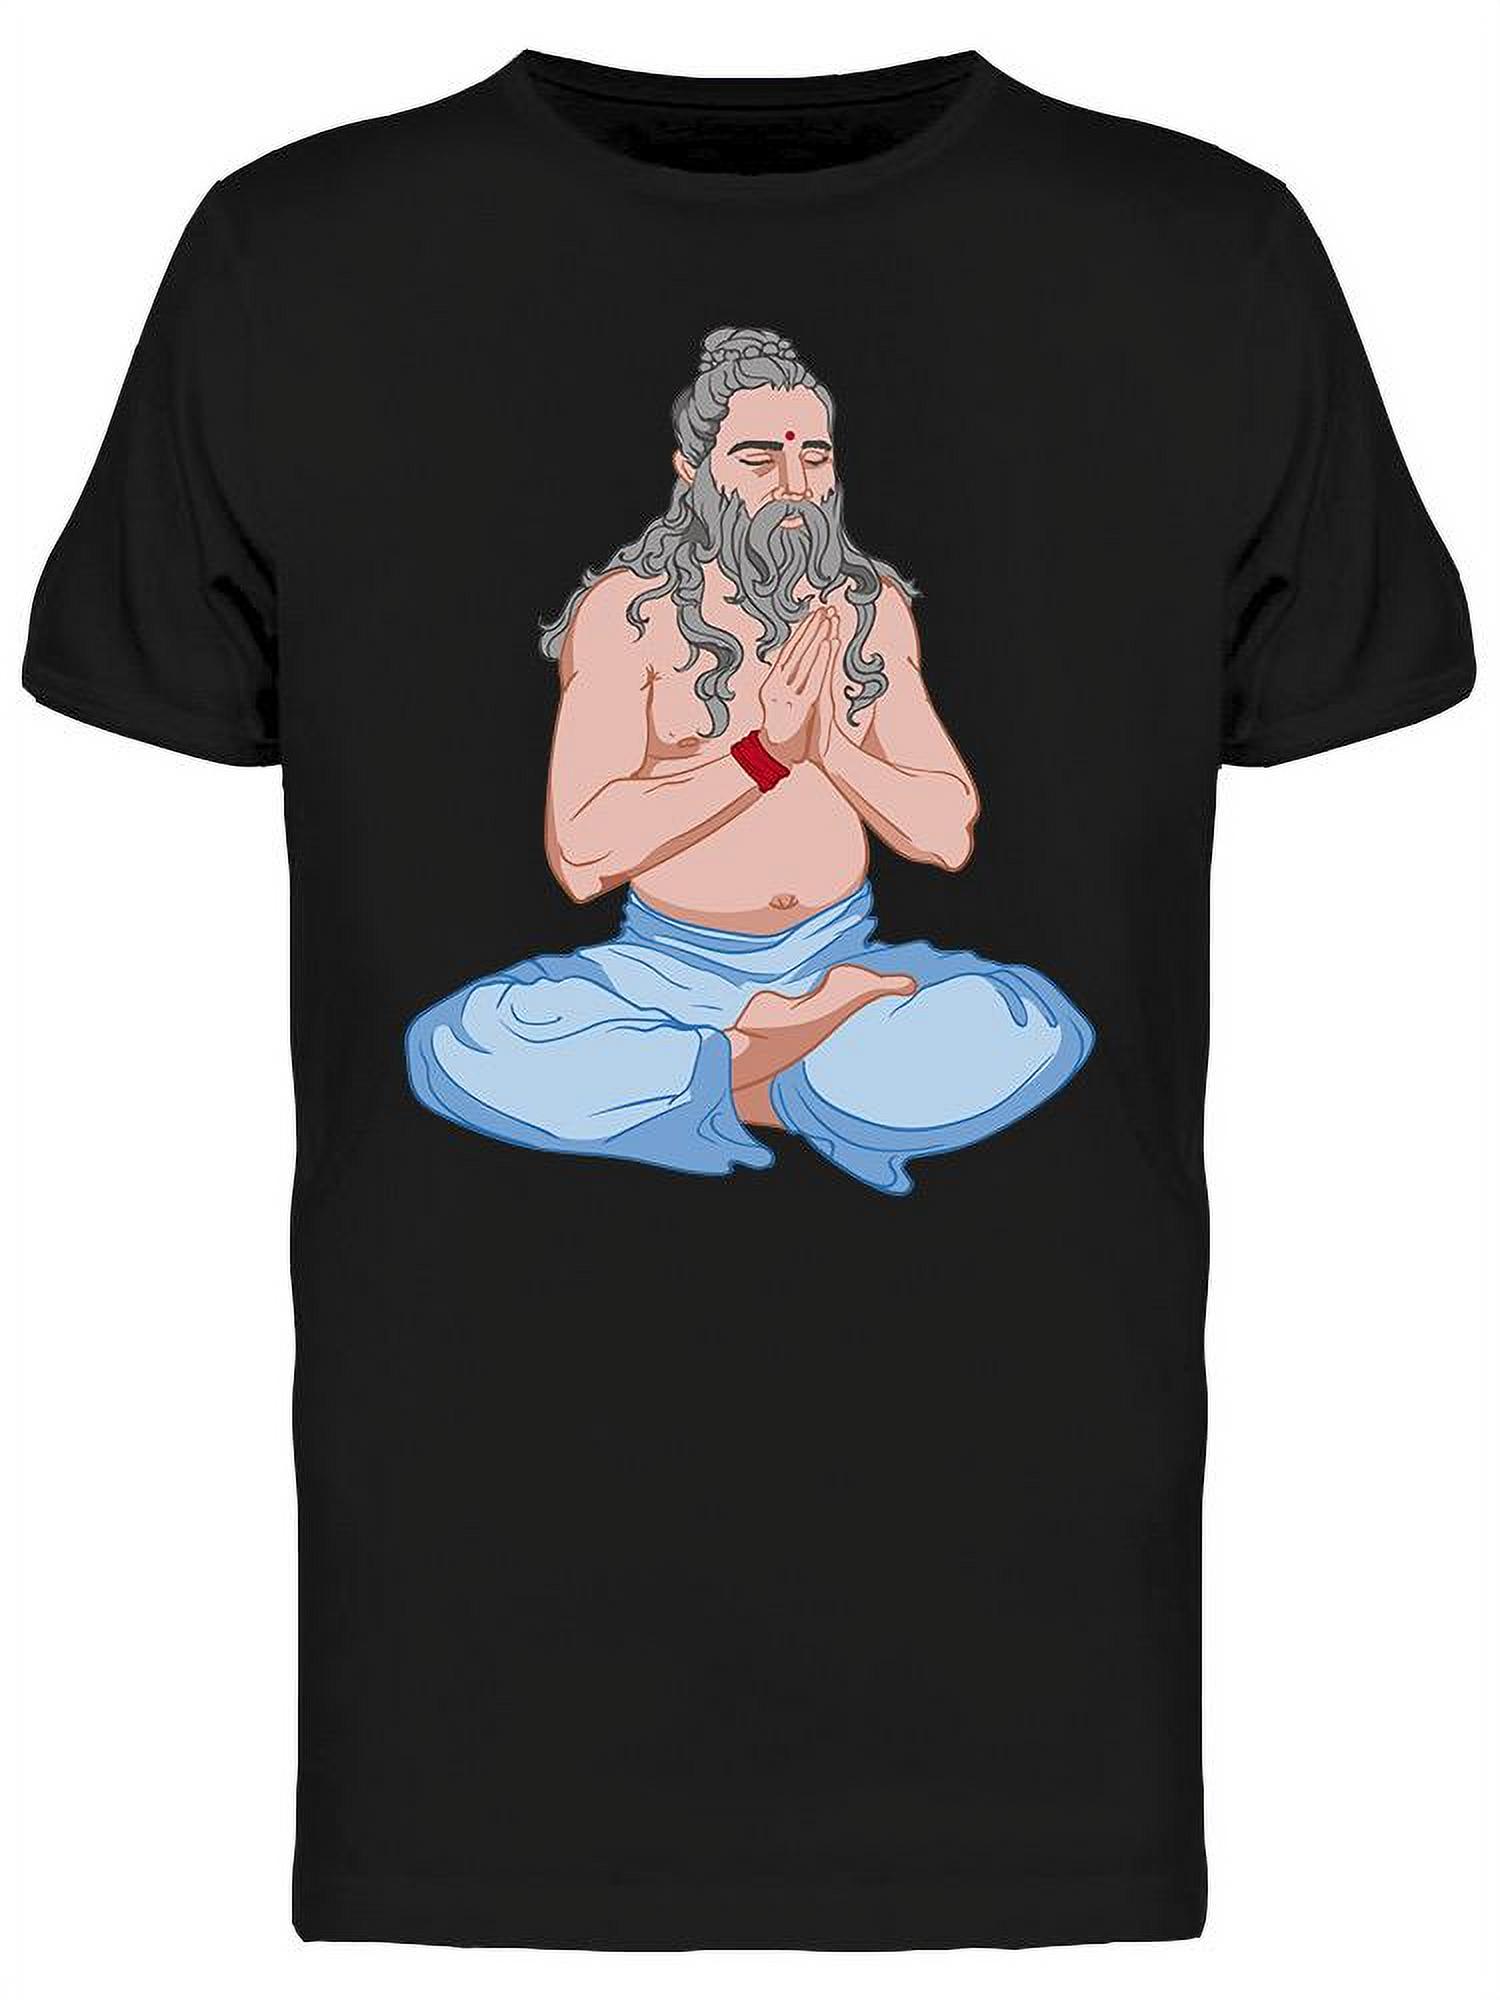 Adult Man With Long Gray Beard T-Shirt Men -Image by Shutterstock, Male Medium - image 1 of 2